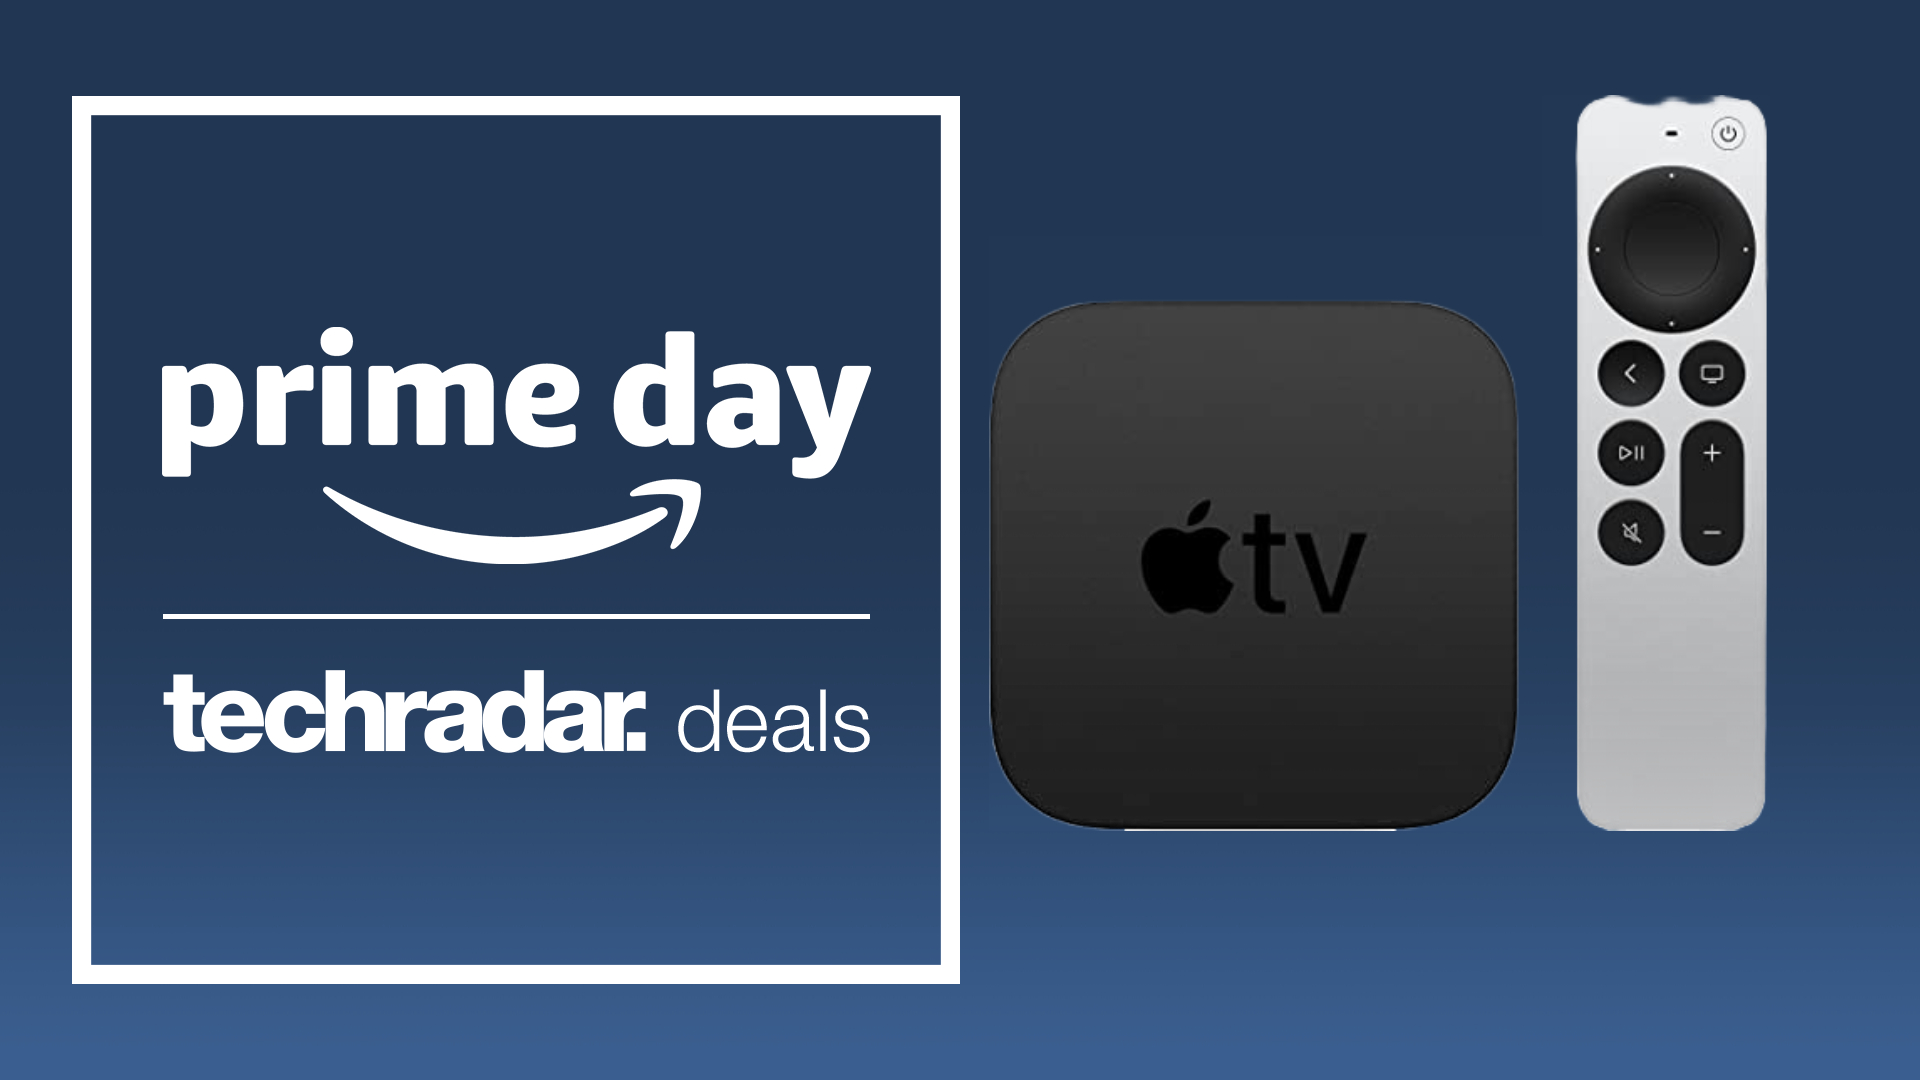 Lowest price ever! Save $74 on the Apple TV in this Prime Day October deal | TechRadar